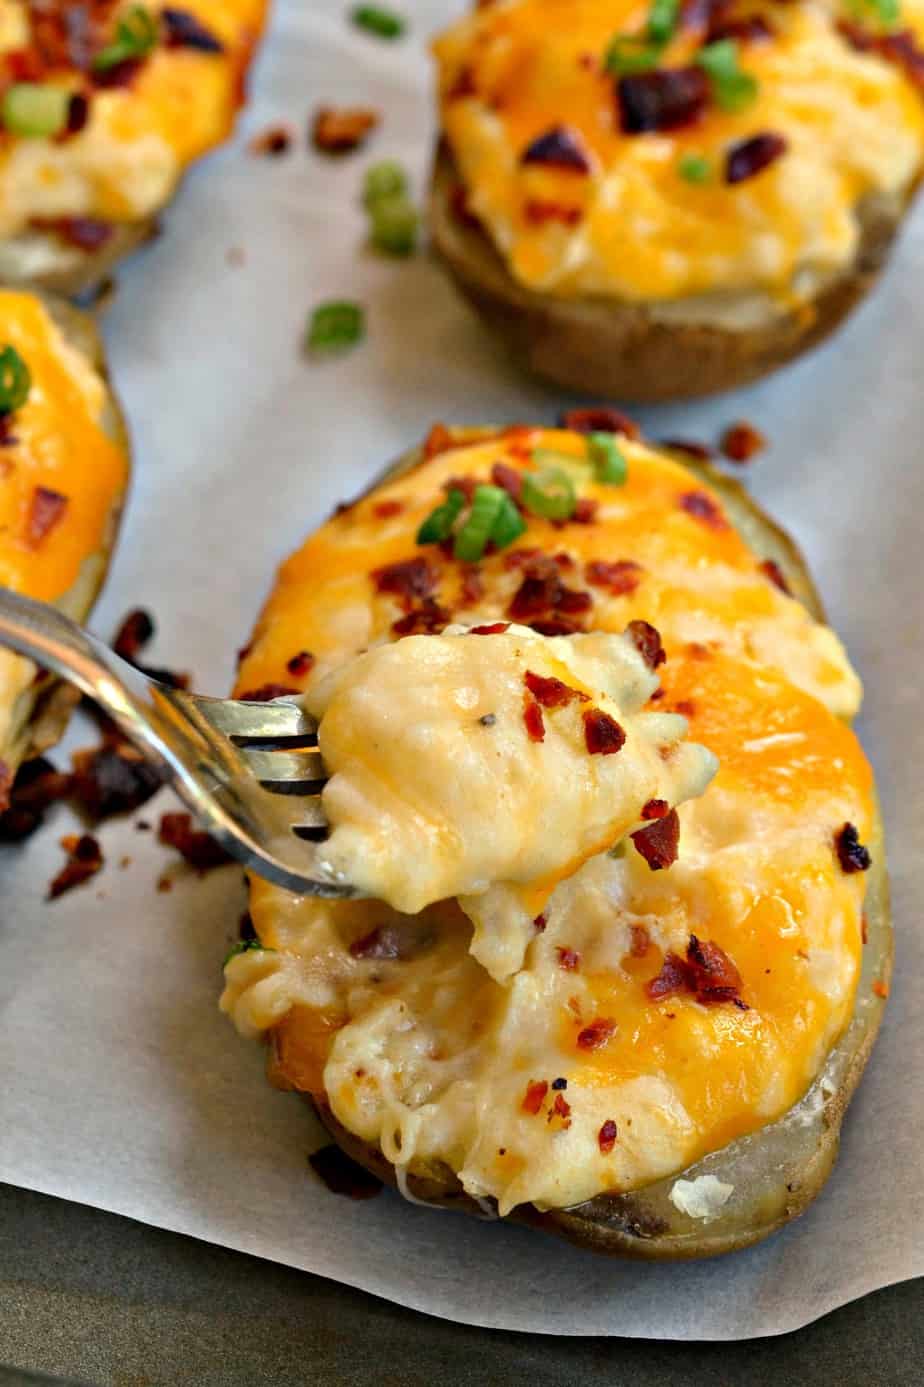 Top these delectable Twice Baked Potatoes with fresh herbs from your garden. 